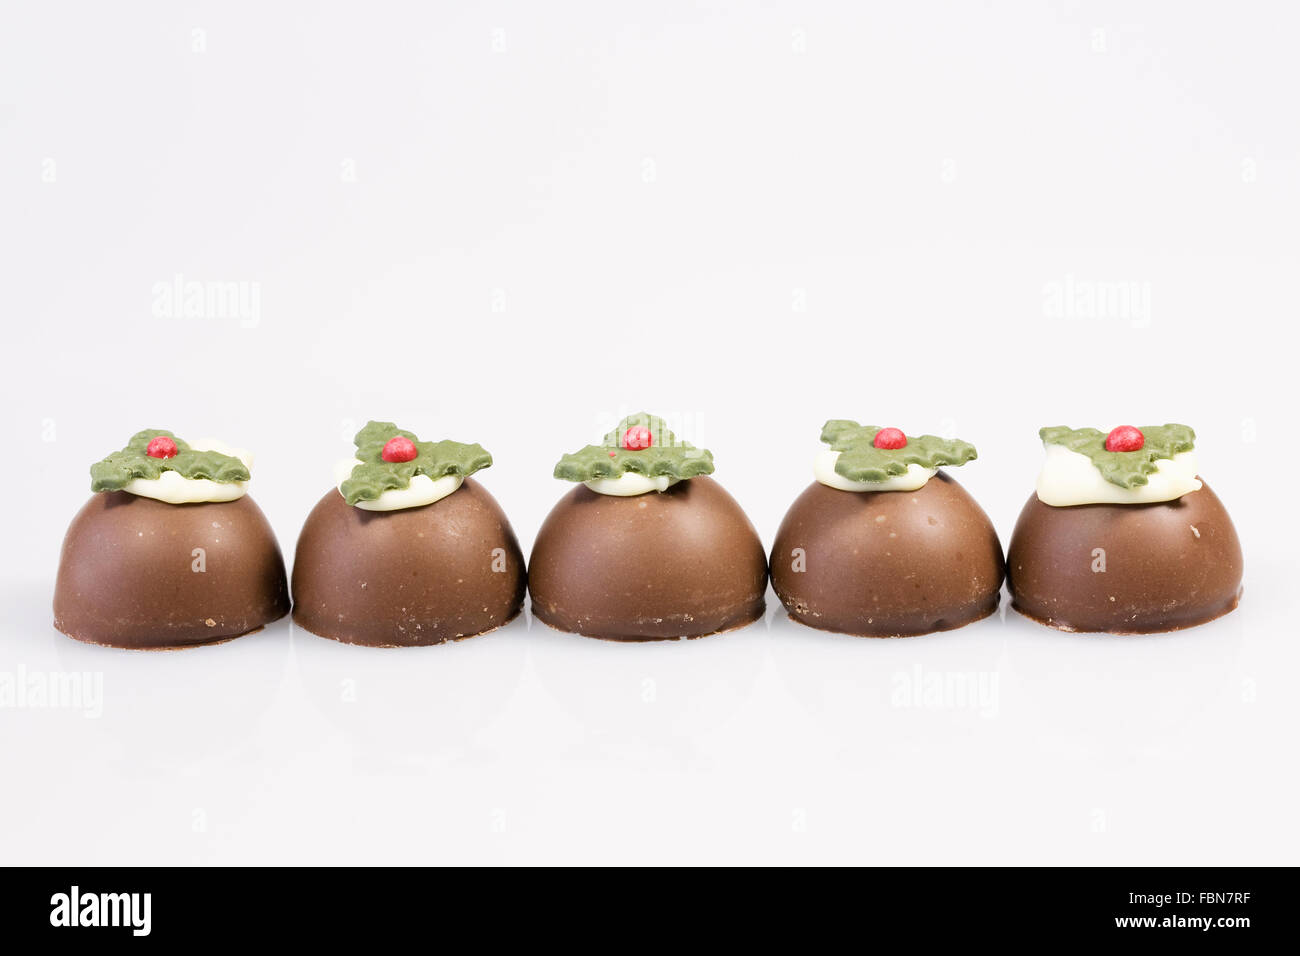 Five Chocolate christmas puddings on a white background. Stock Photo